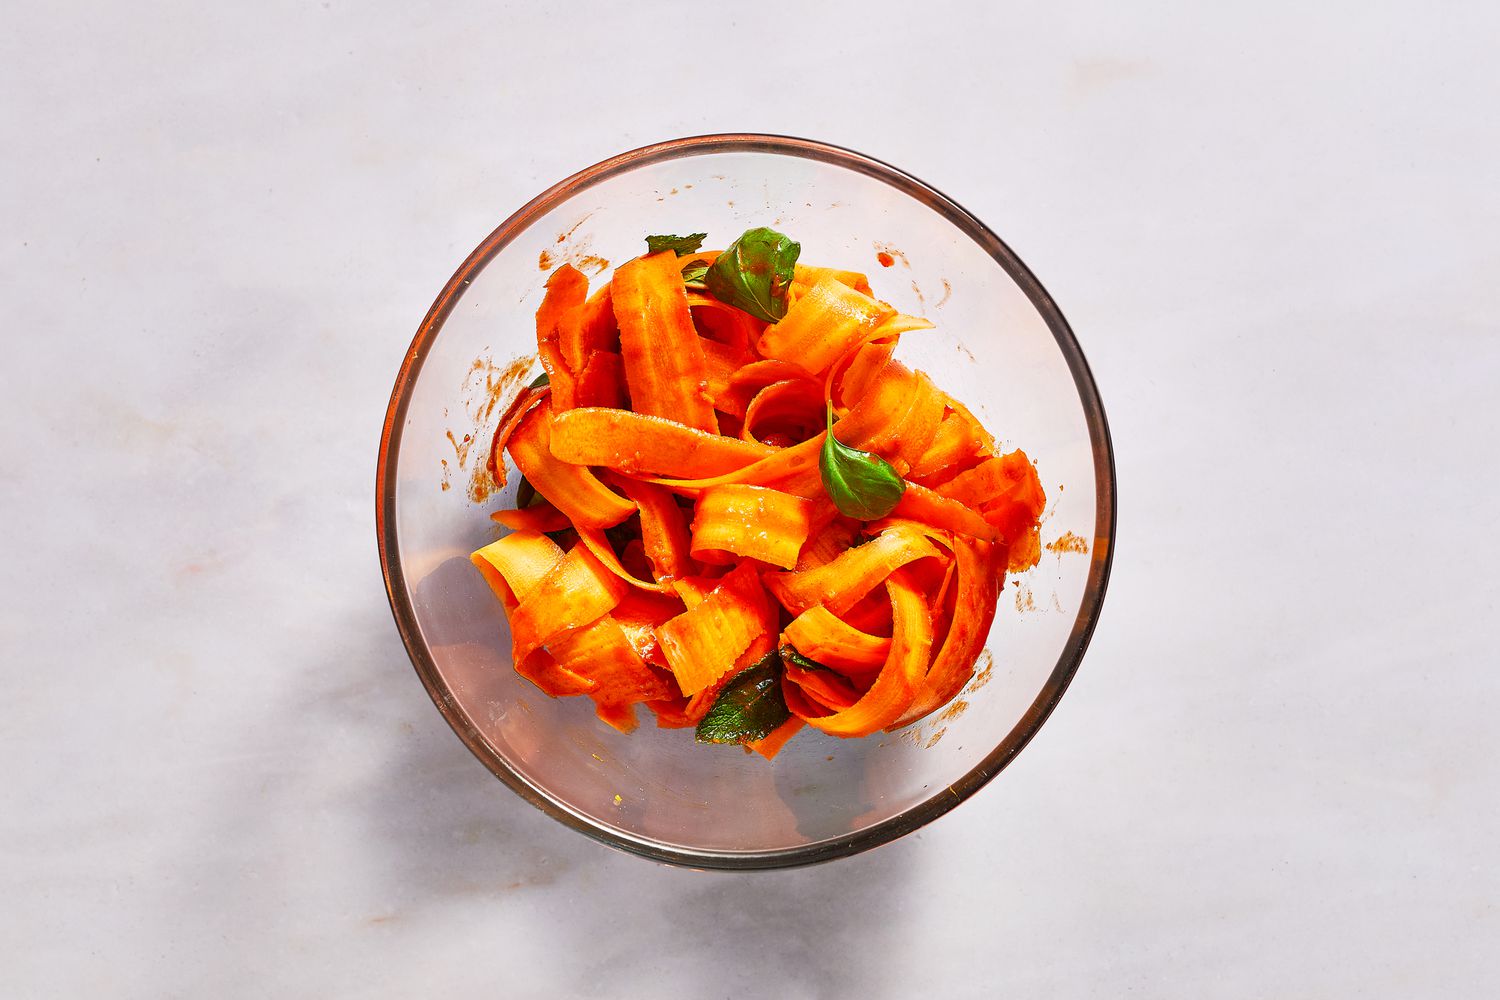 A bowl of shaved carrot ribbons, mint leaves, and basil leaves tossed with gochujang dressing